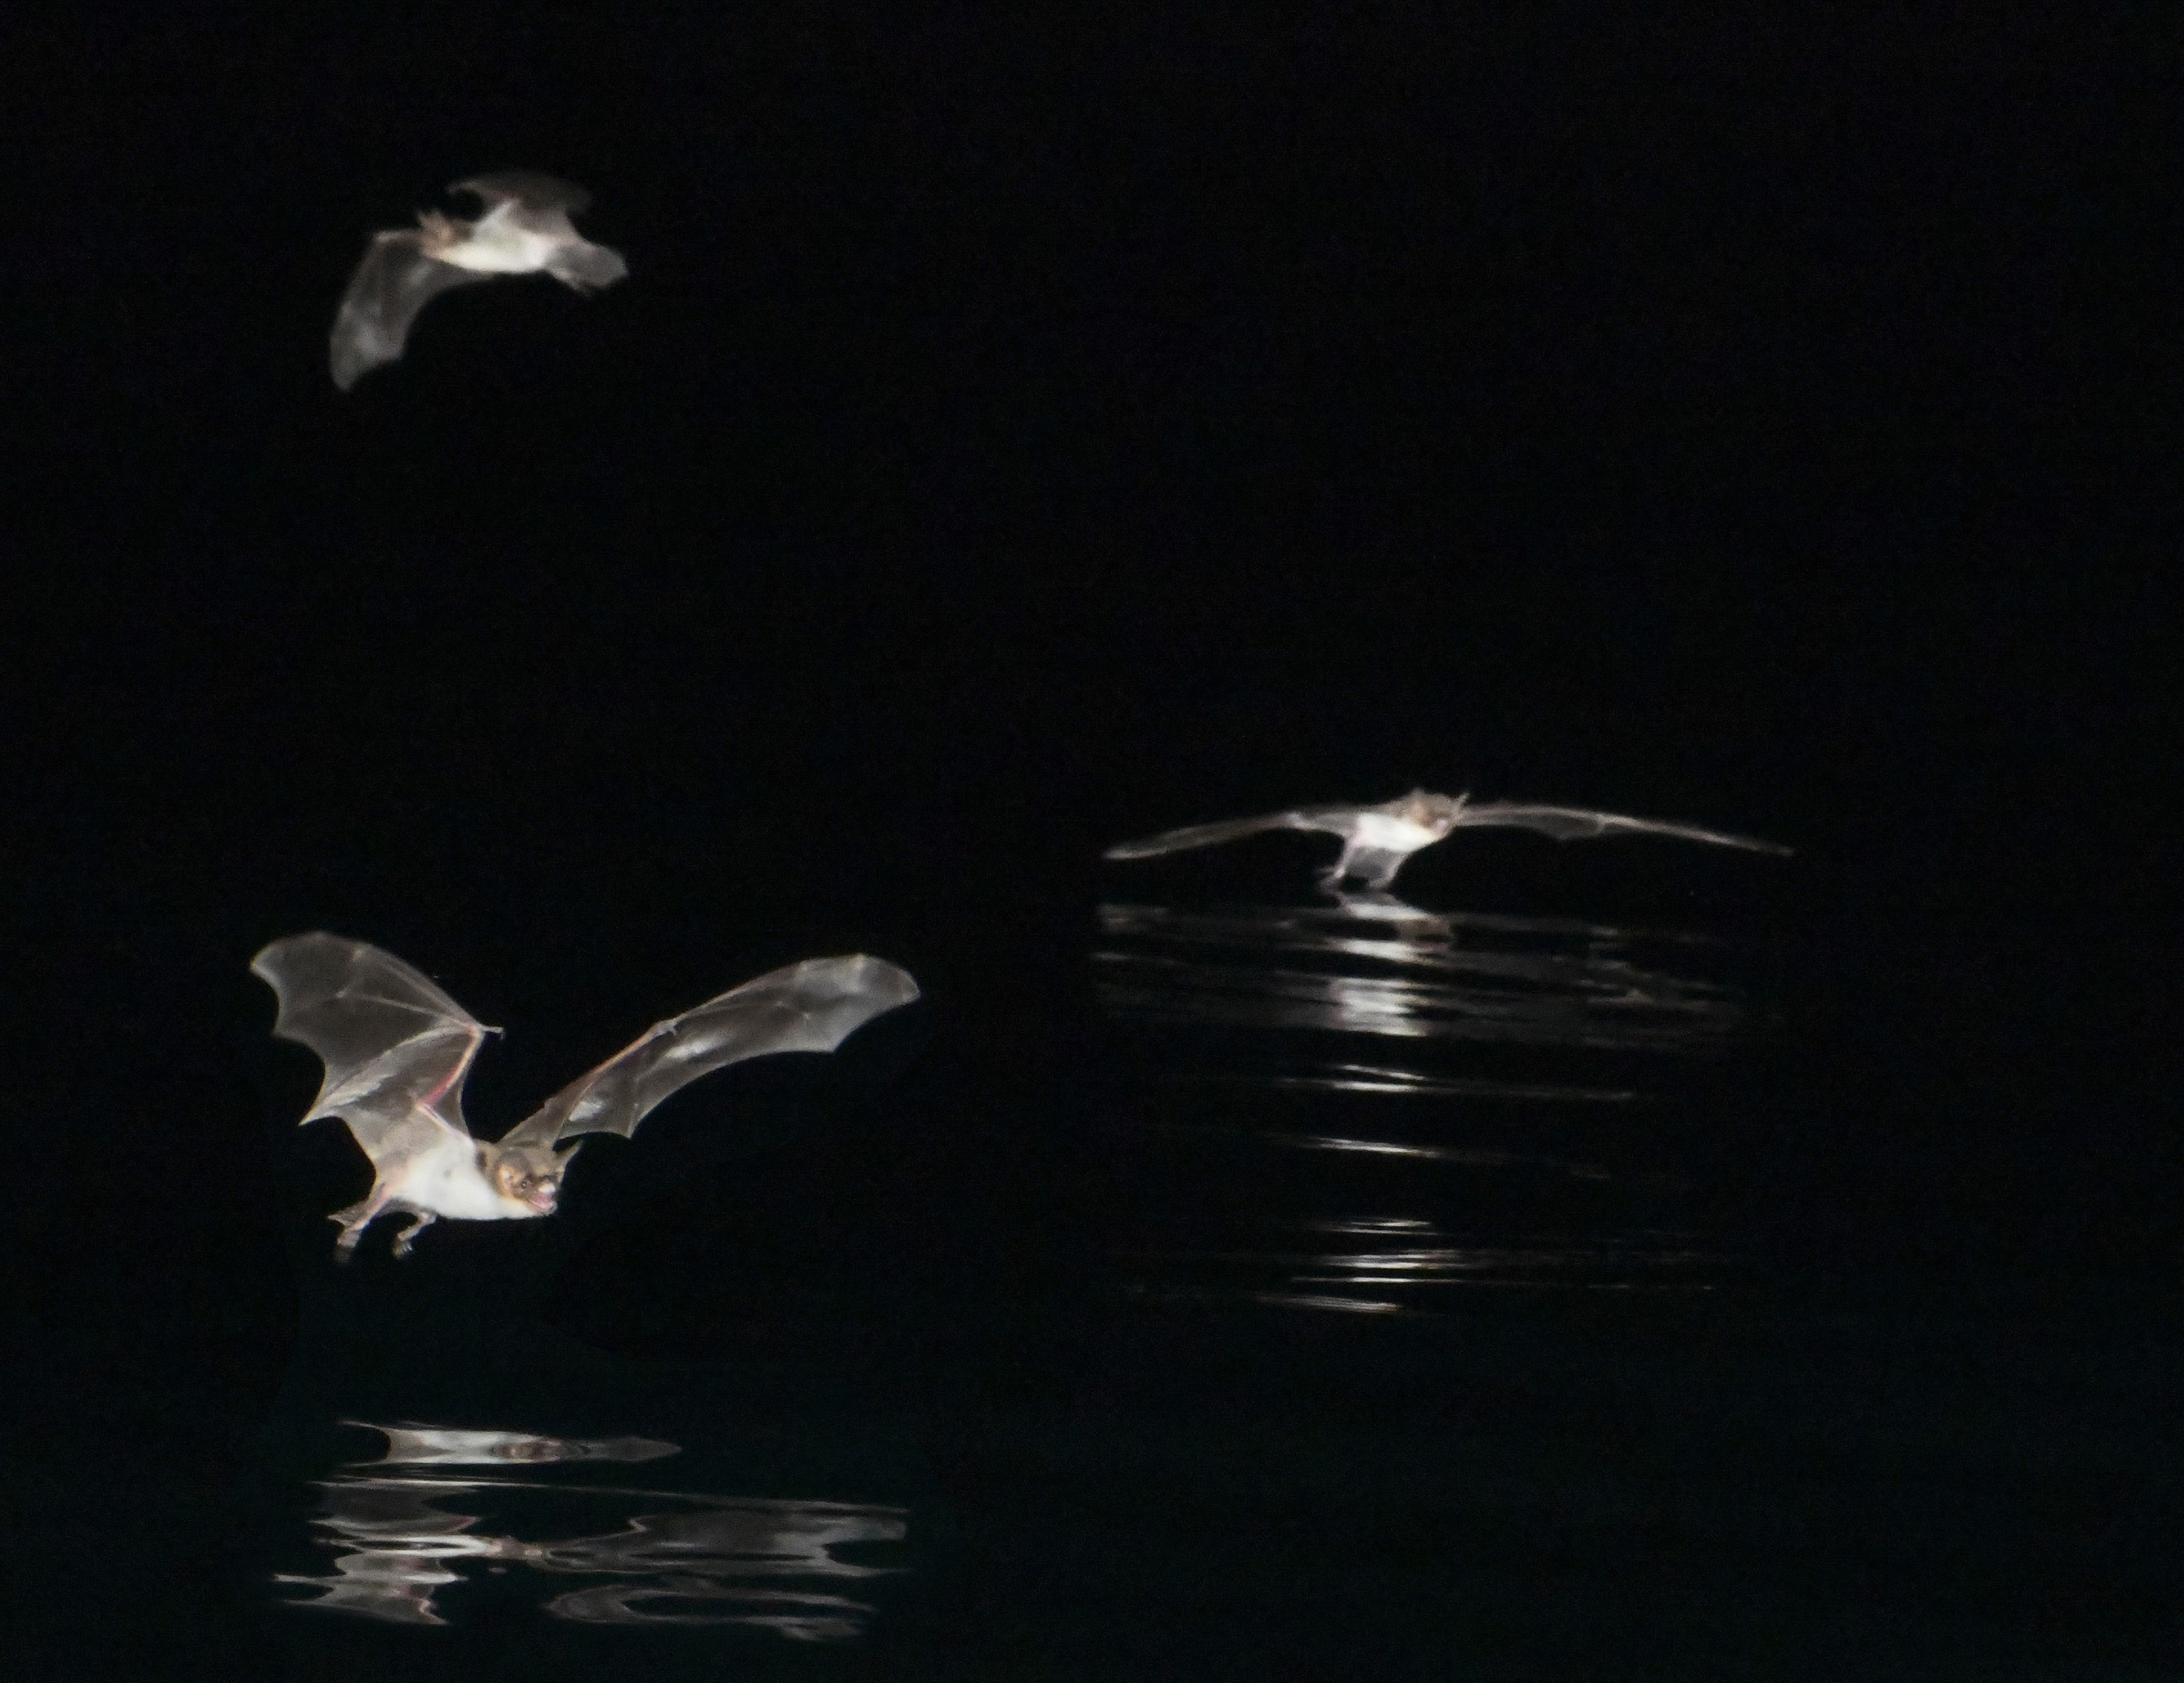 Three Mexican fish-eating bats hunting over the ocean at night. Photo: Glenn Thompson (Click image to download hi-res version)